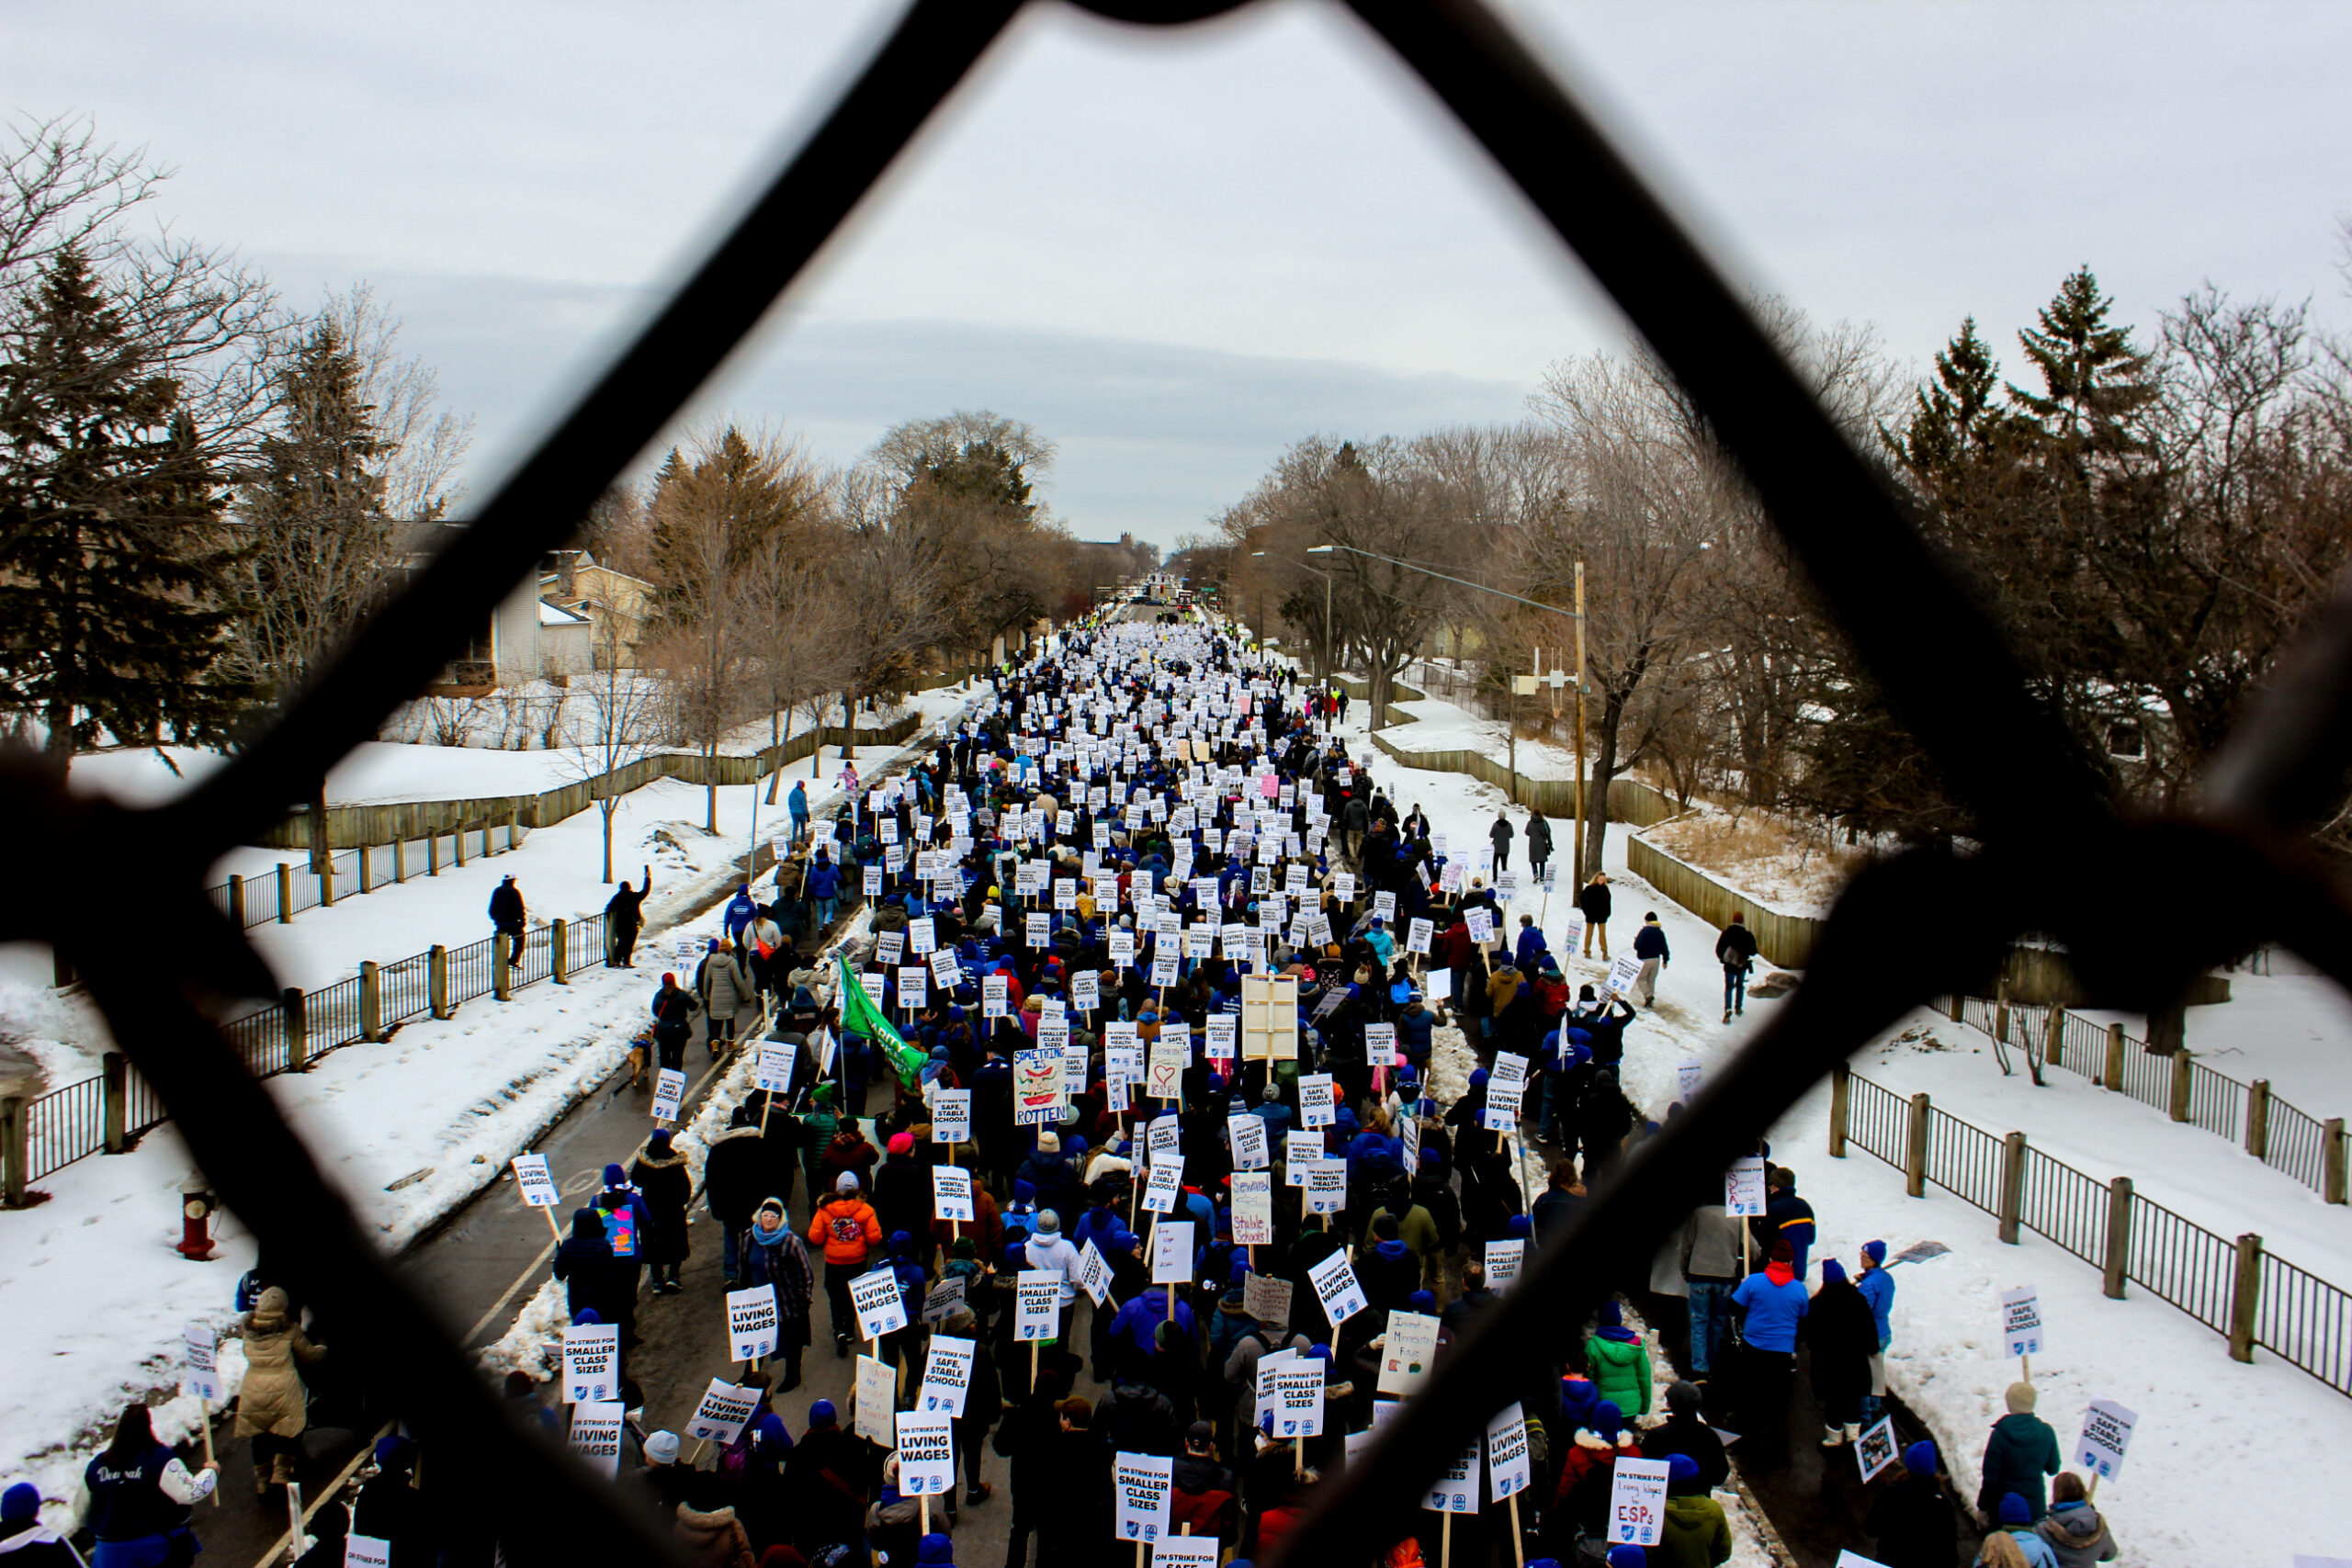 an aerial view of a protest march in the snow-lined streets, framed by a chain-link fence.